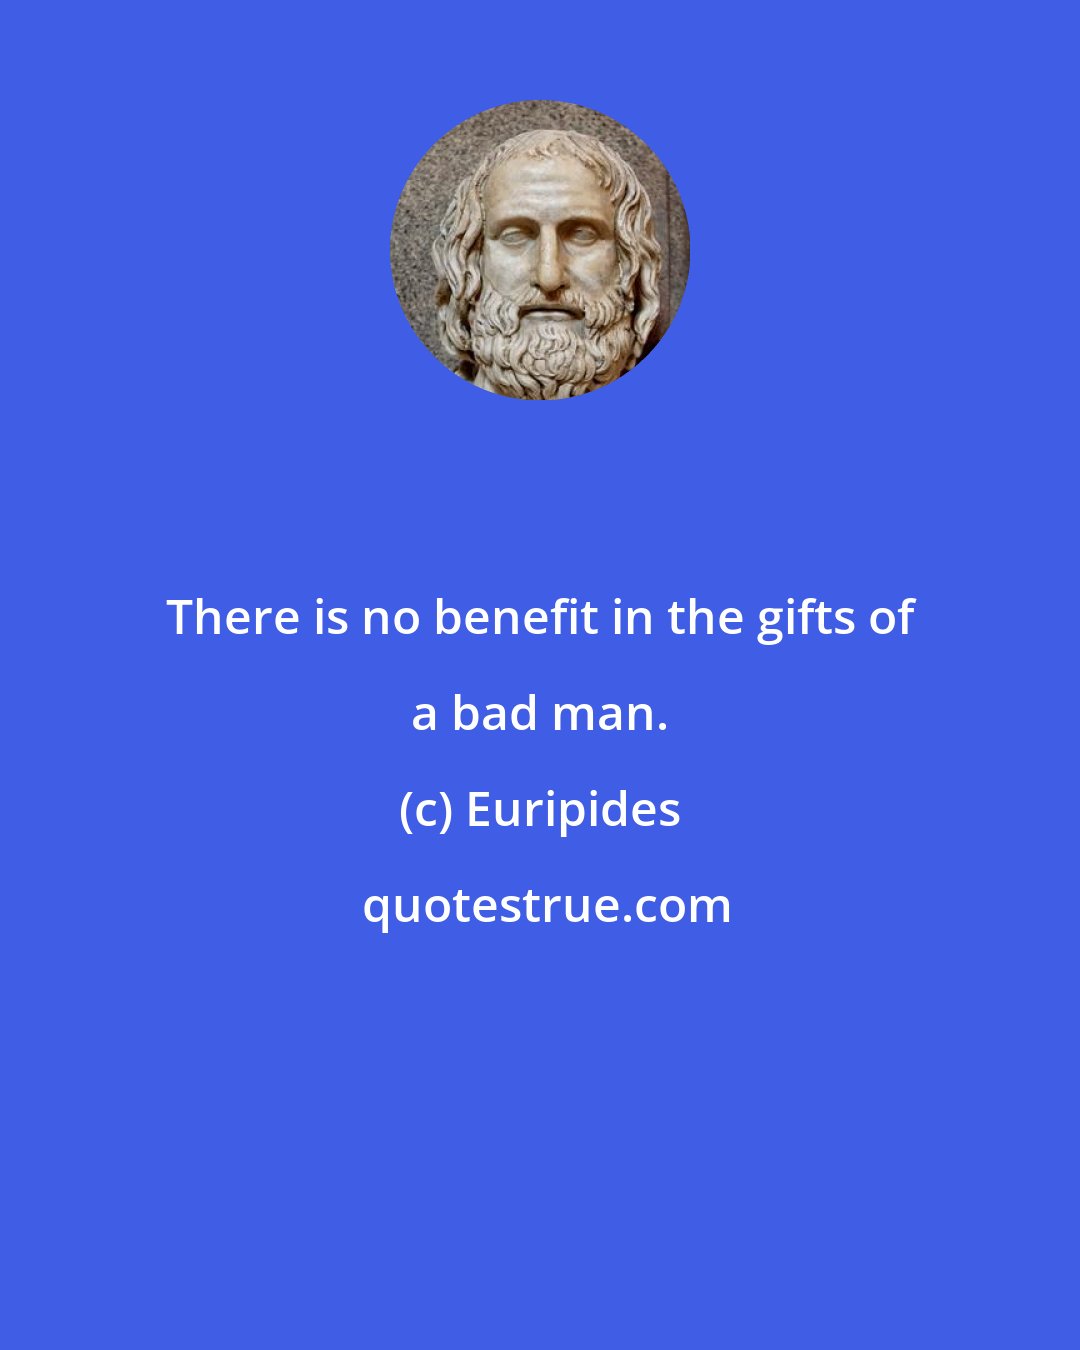 Euripides: There is no benefit in the gifts of a bad man.